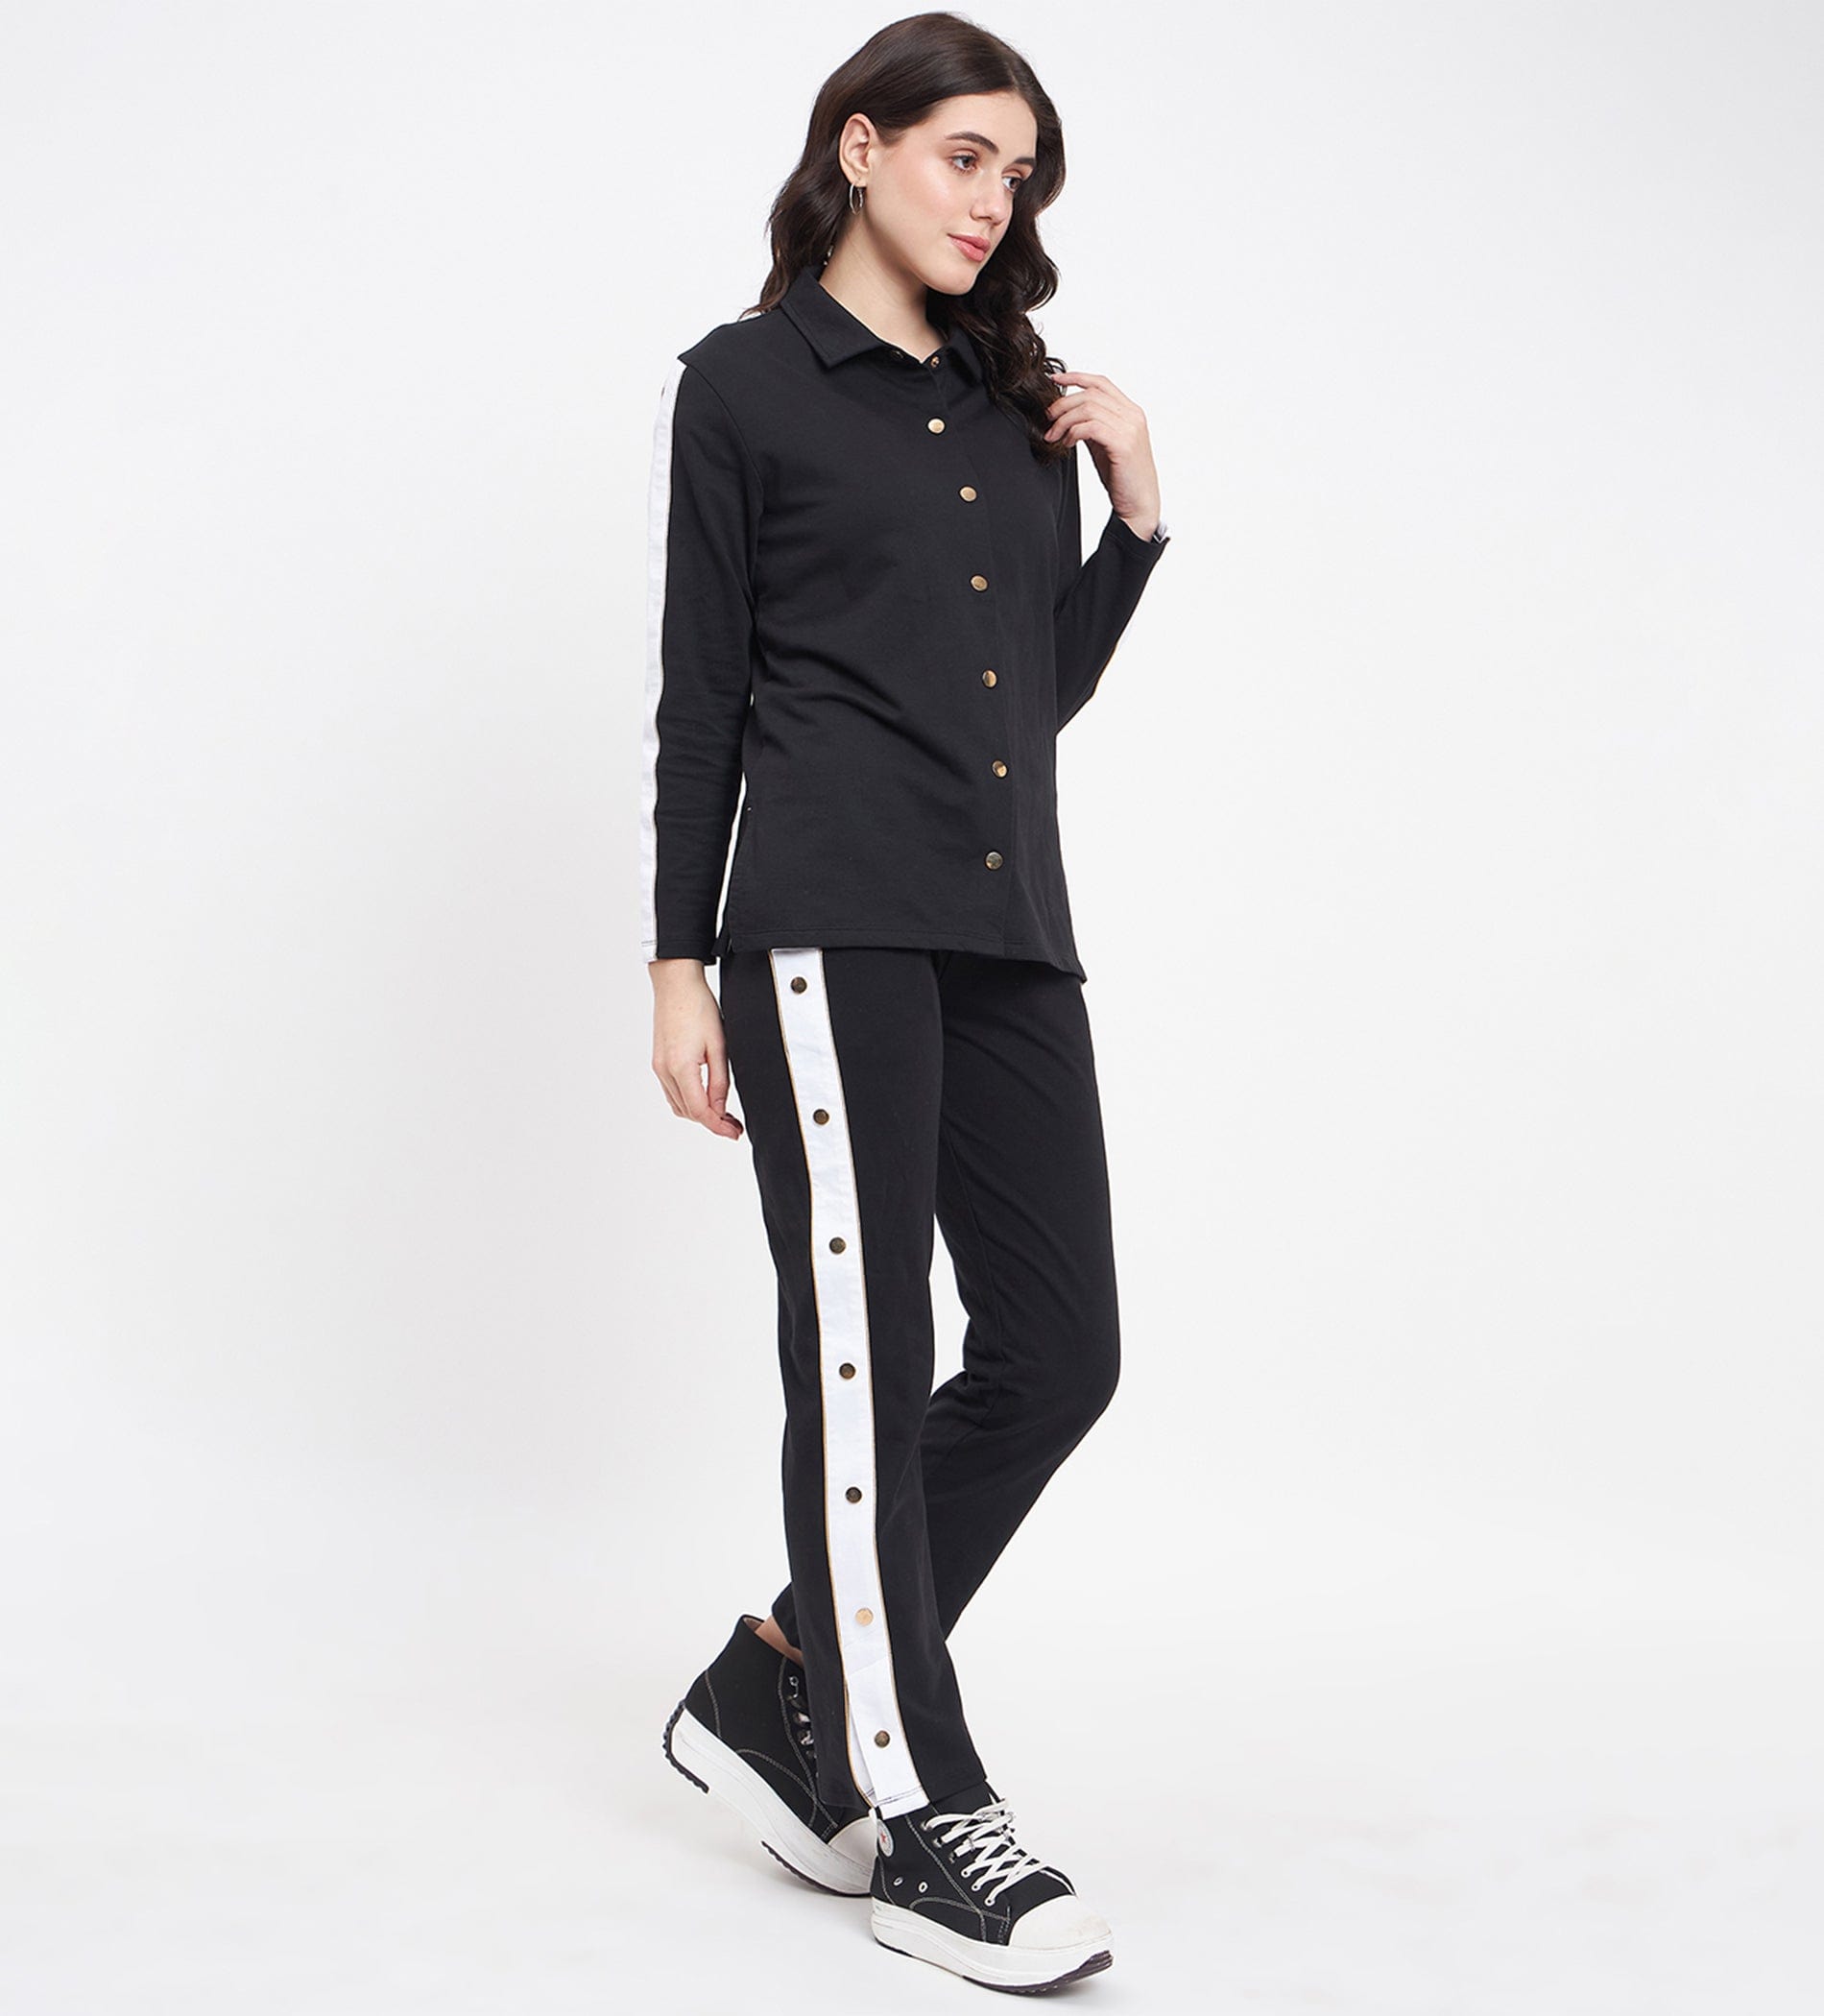 Co-ords Co-Ords Black and white Co-ord Set for Women